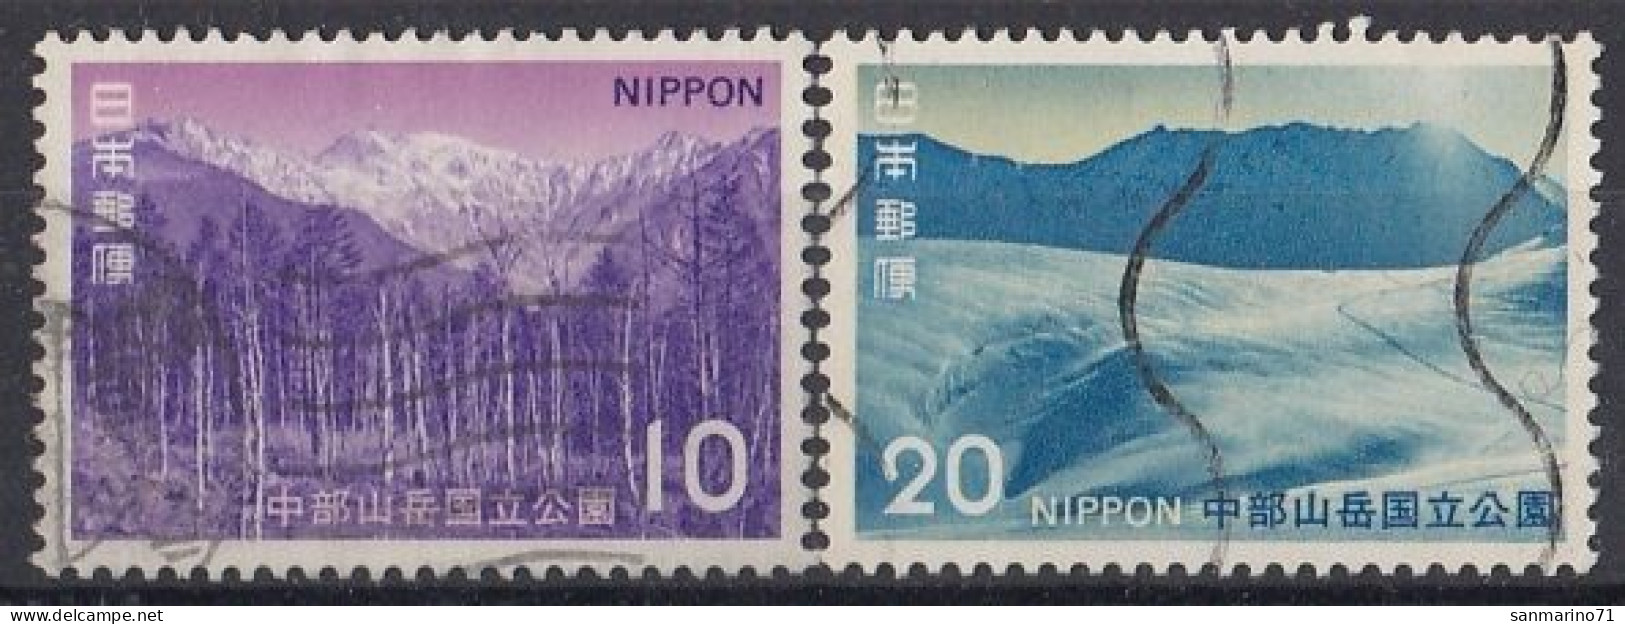 JAPAN 1157-1158,used - Mountains